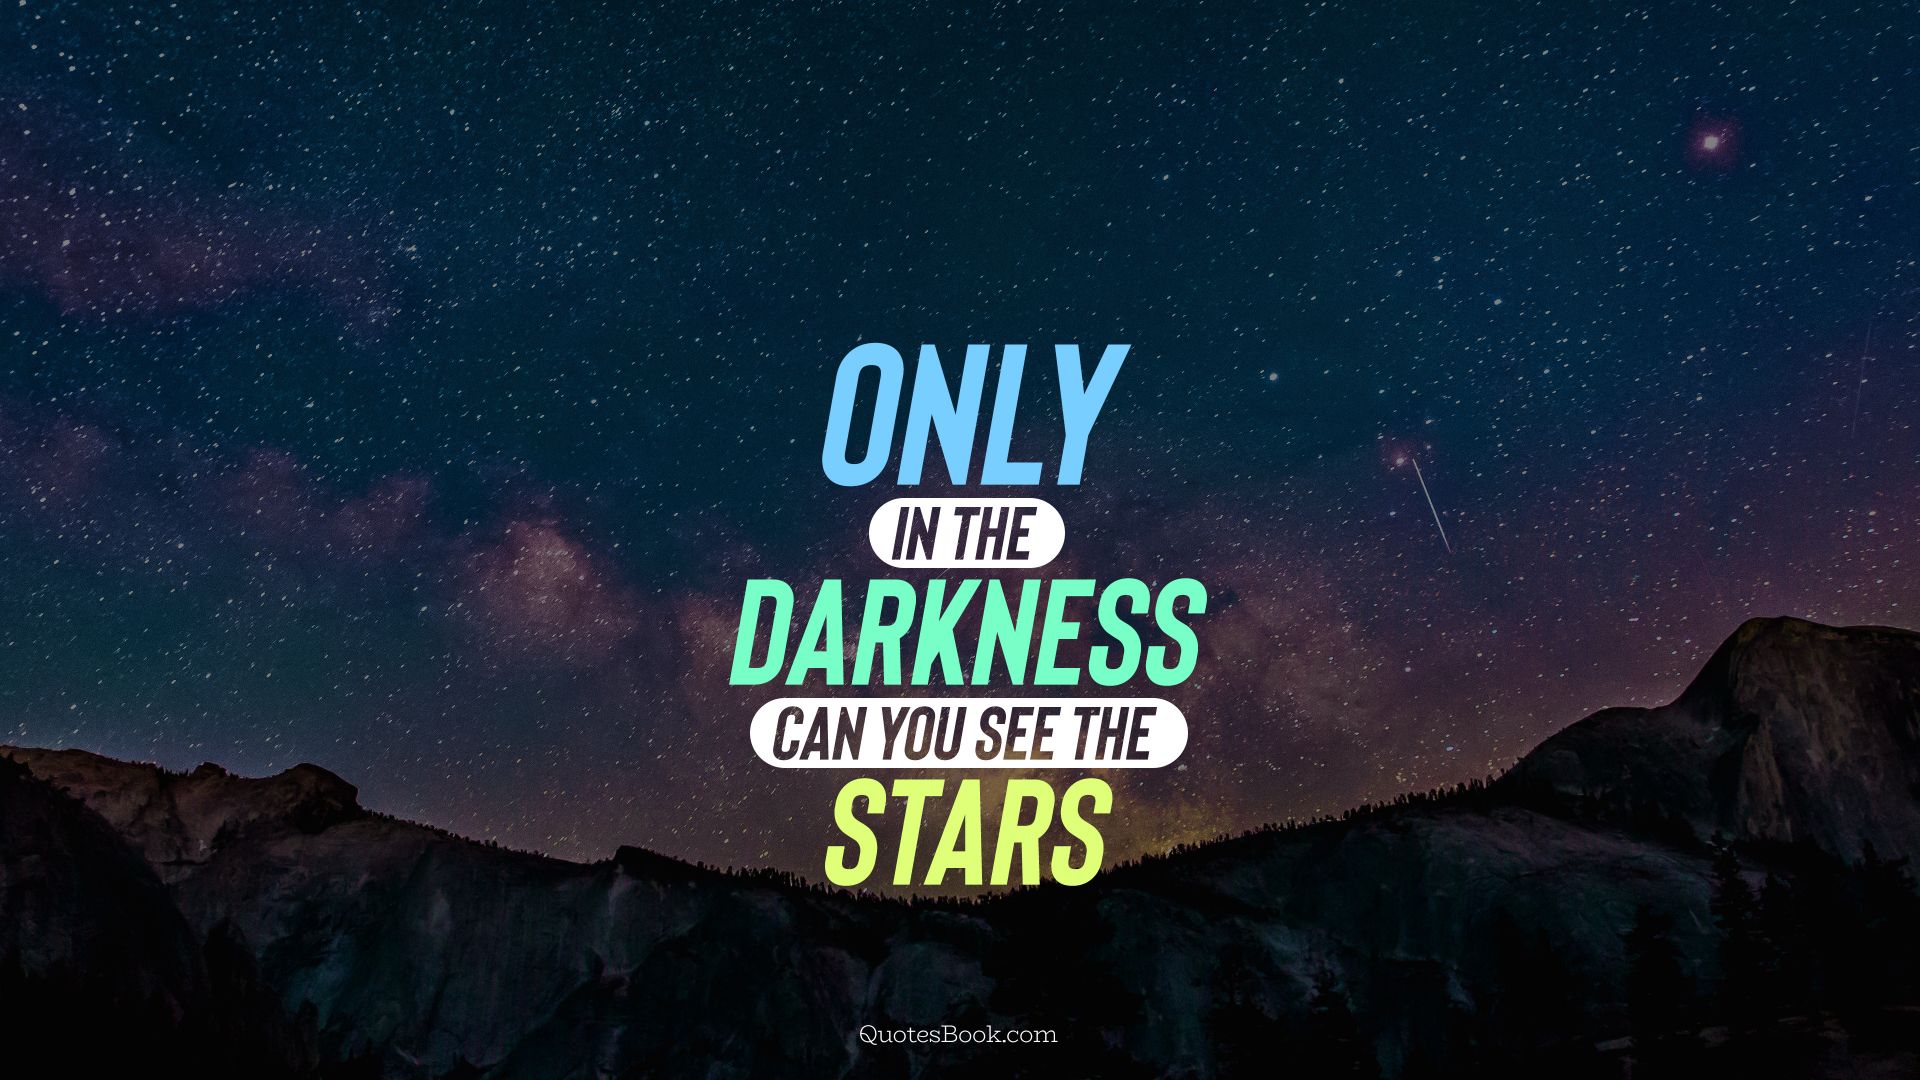 Оnly in the darkness can you see the stars